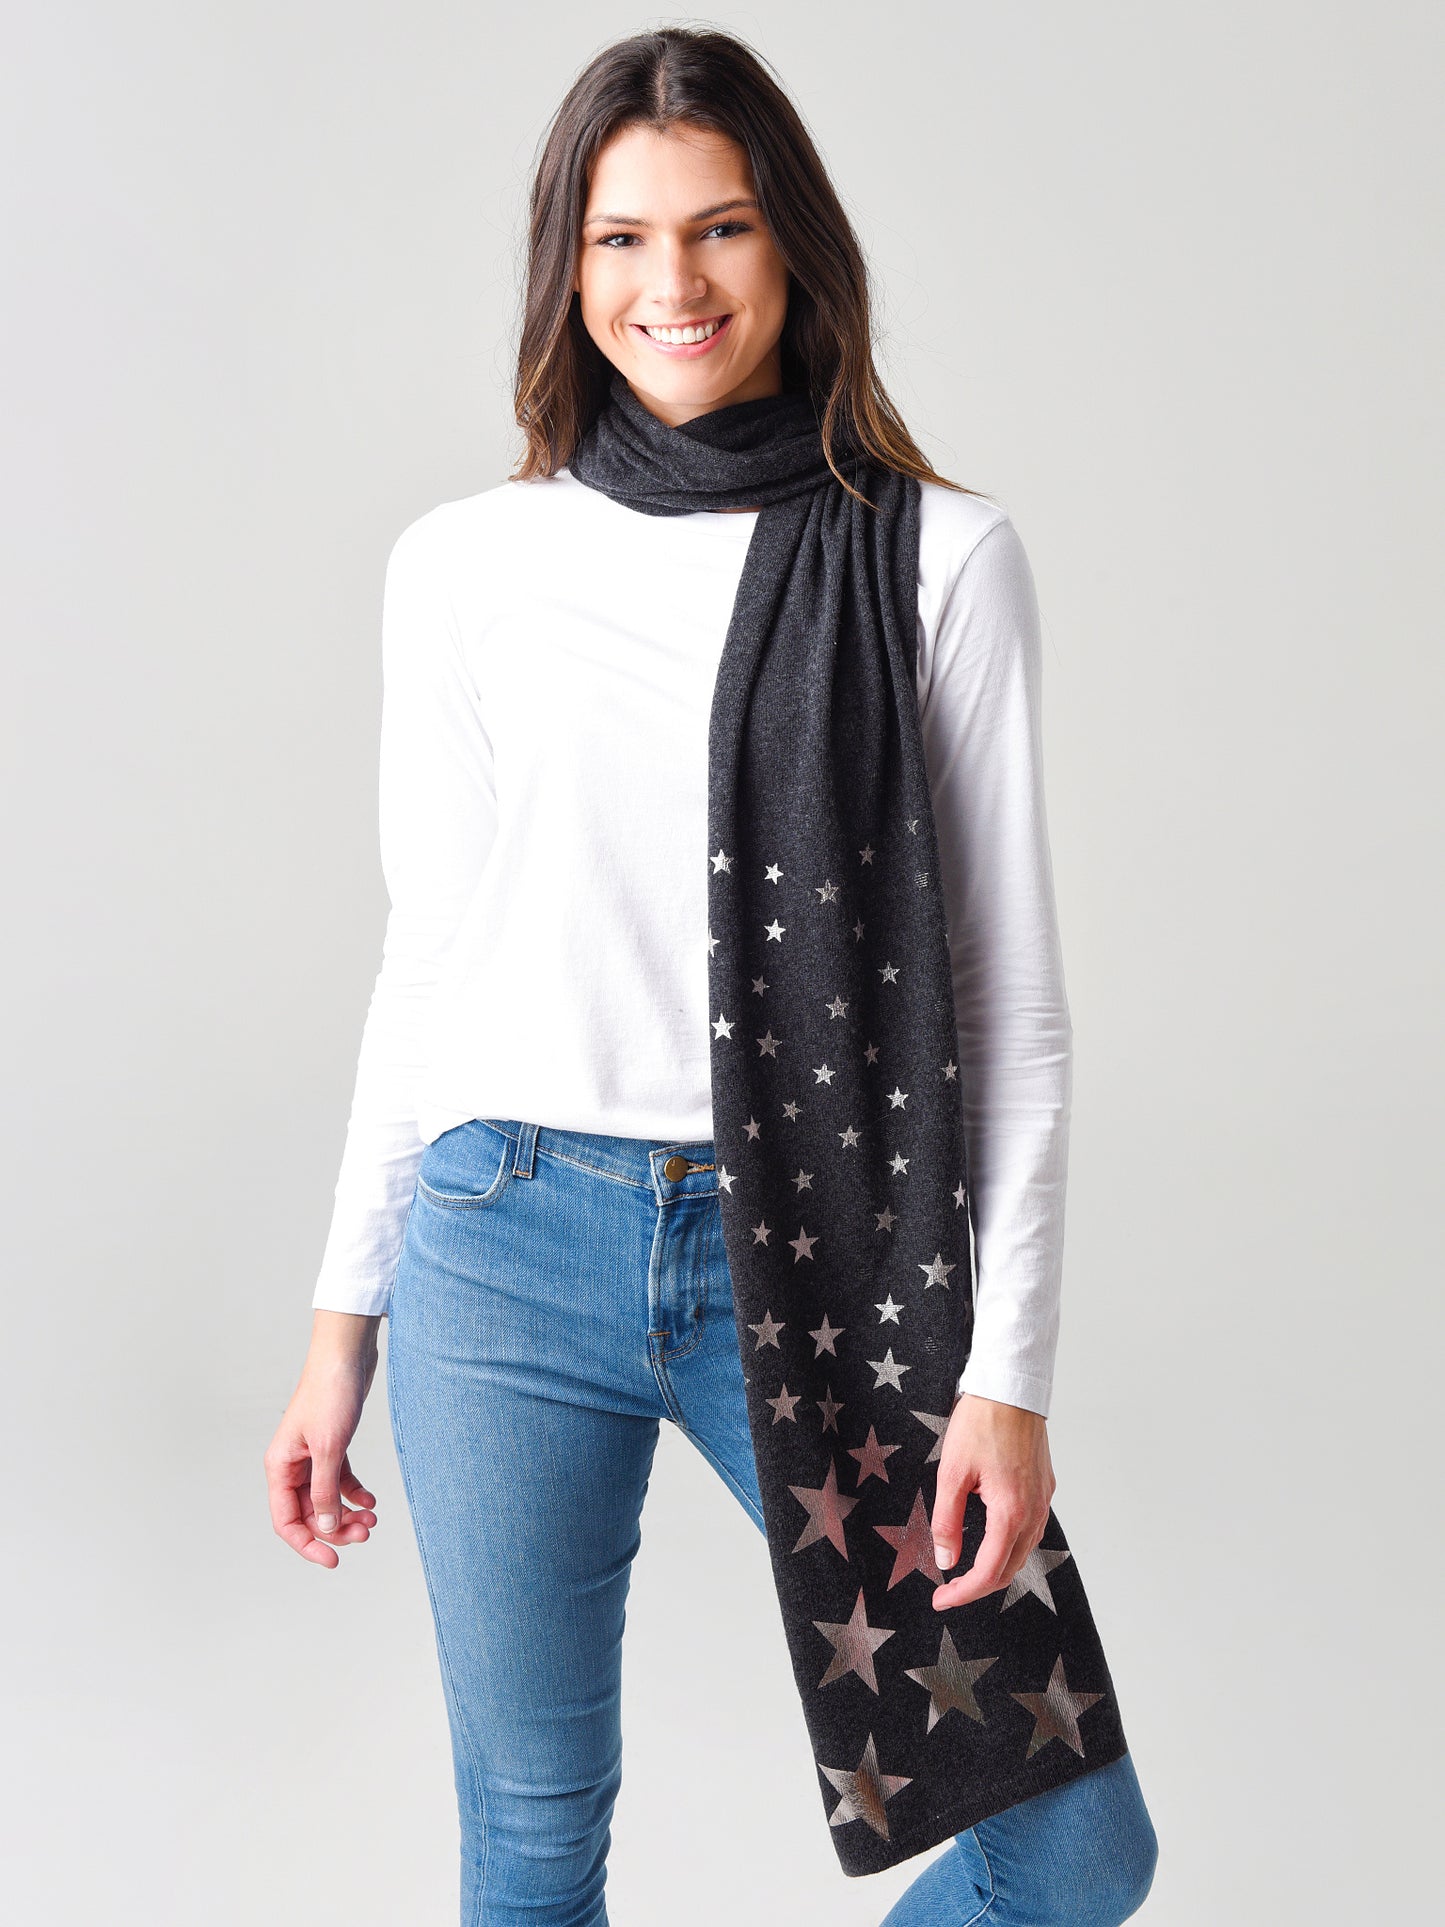 Mitchie's Matchings Knitted Scarf With Foil stars Pattern